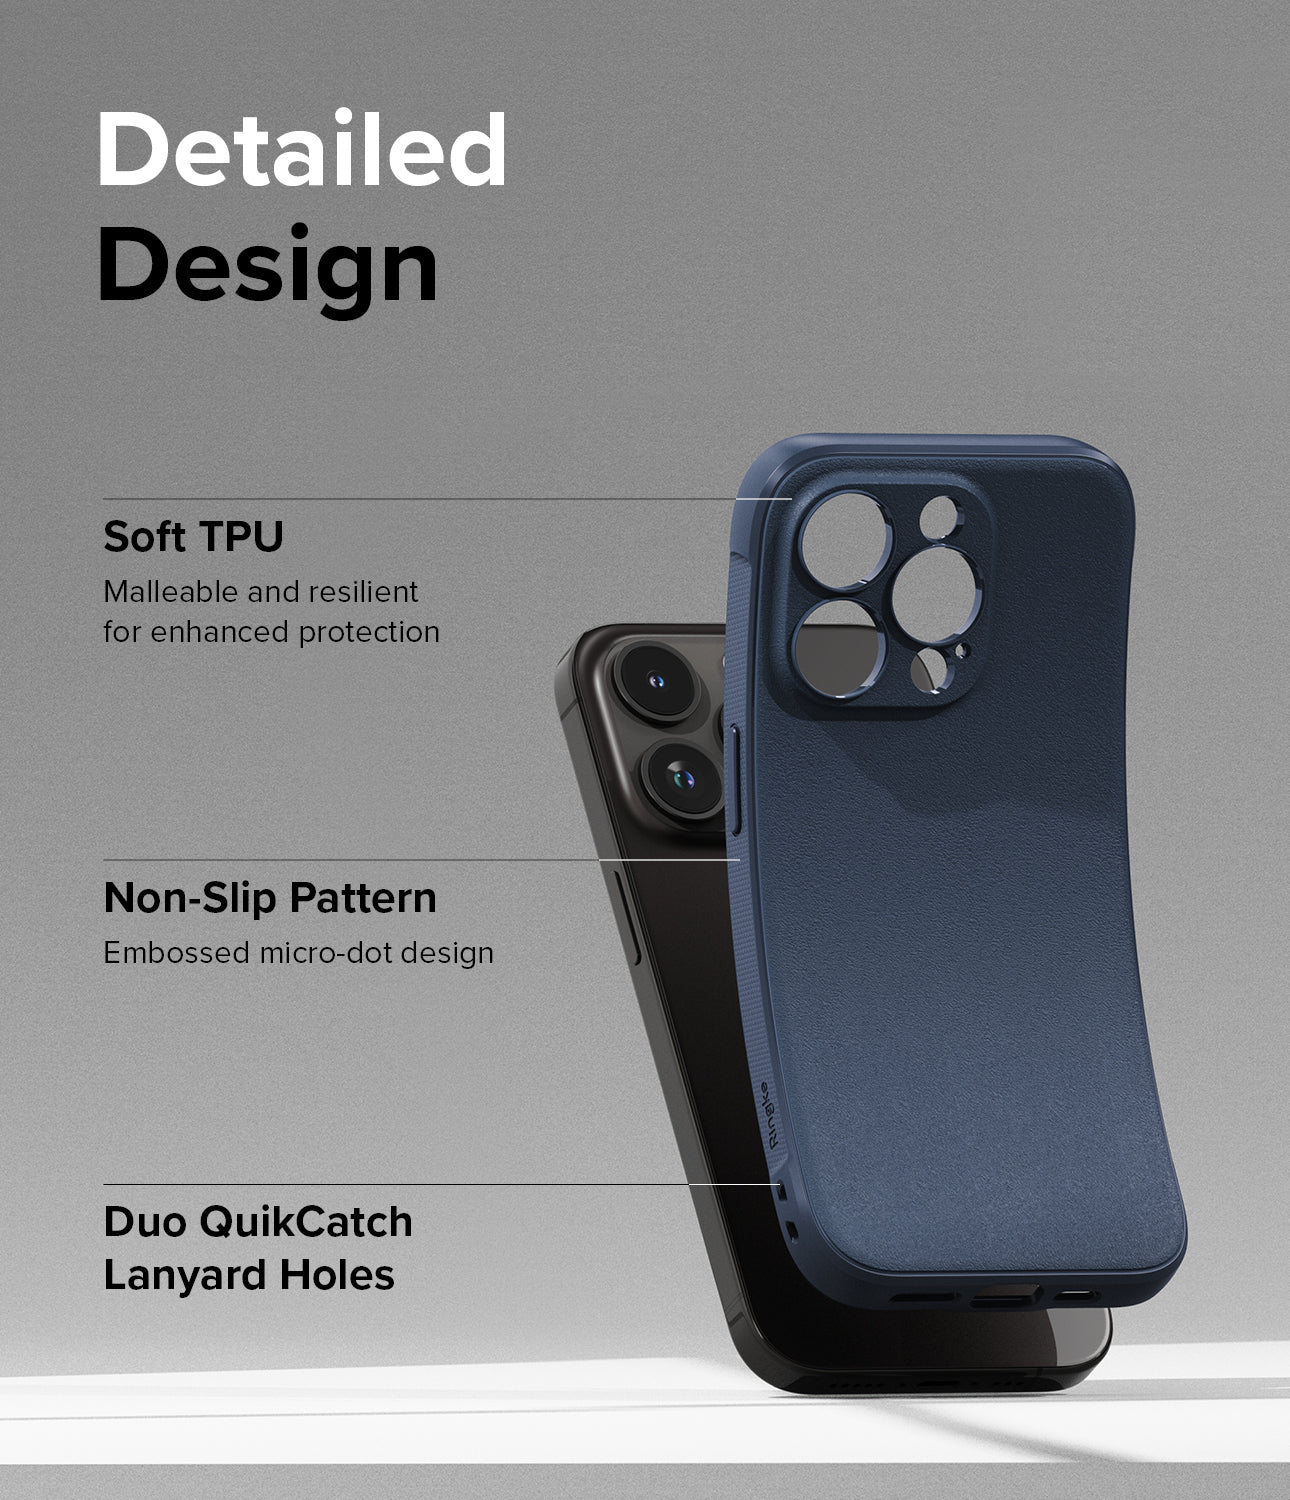 iPhone 15 Pro Max Case | Onyx - Navy - Detailed Design. Malleable and resilient for enhanced protection with Soft TPU. Embossed micro-dot design with Non-Slip Pattern. Duo QuikCatch Lanyard Holes.